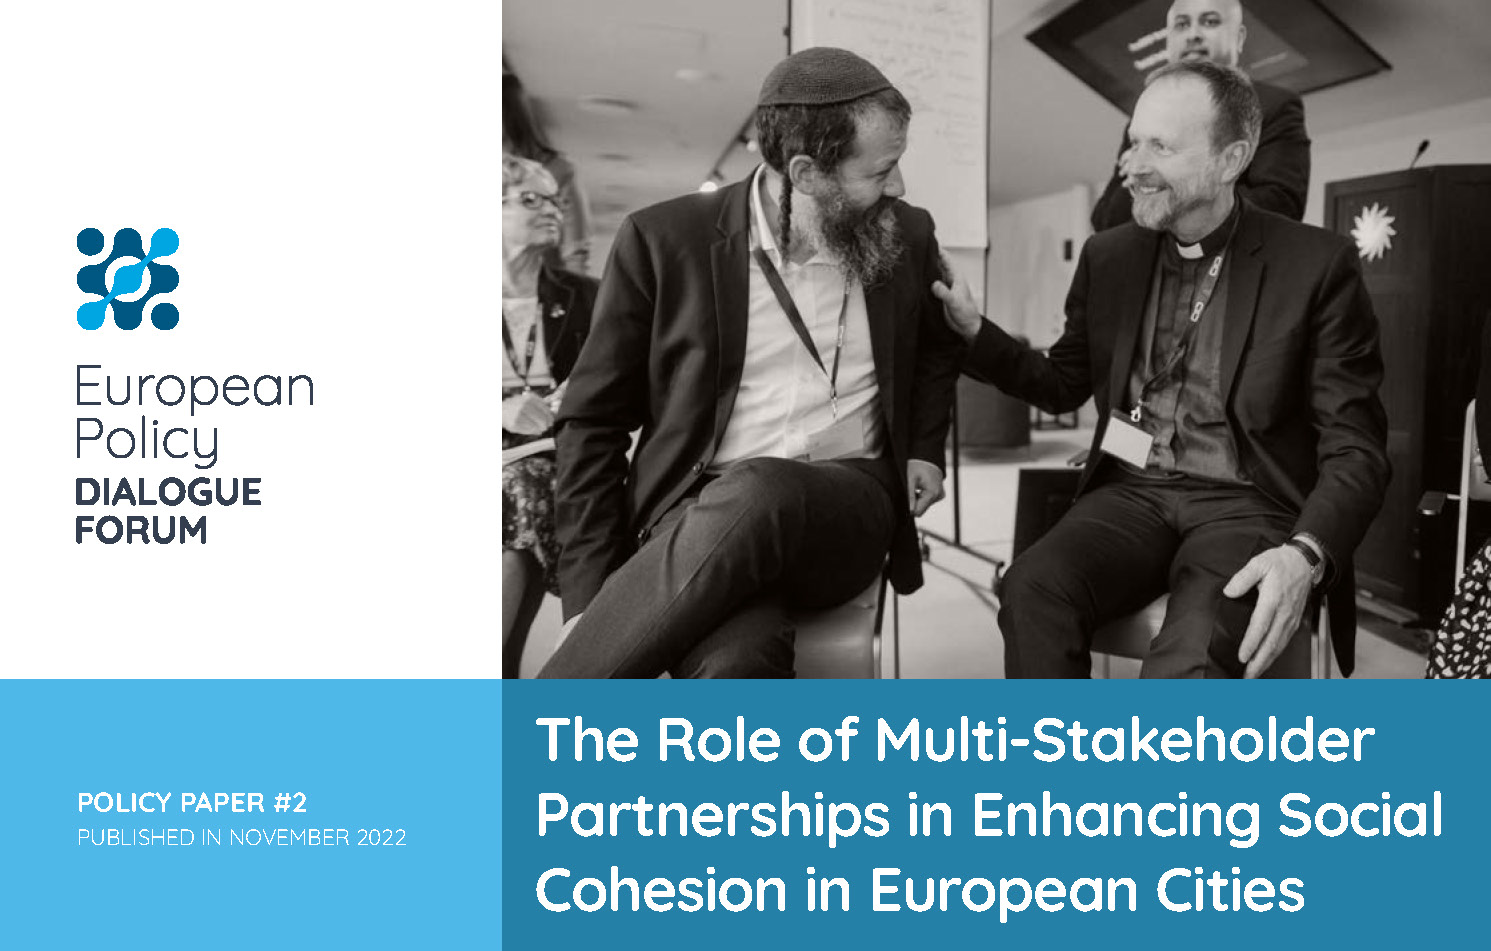 Policy Paper: The Role of Multi-Stakeholder Partnerships in Enhancing Social Cohesion in European Cities